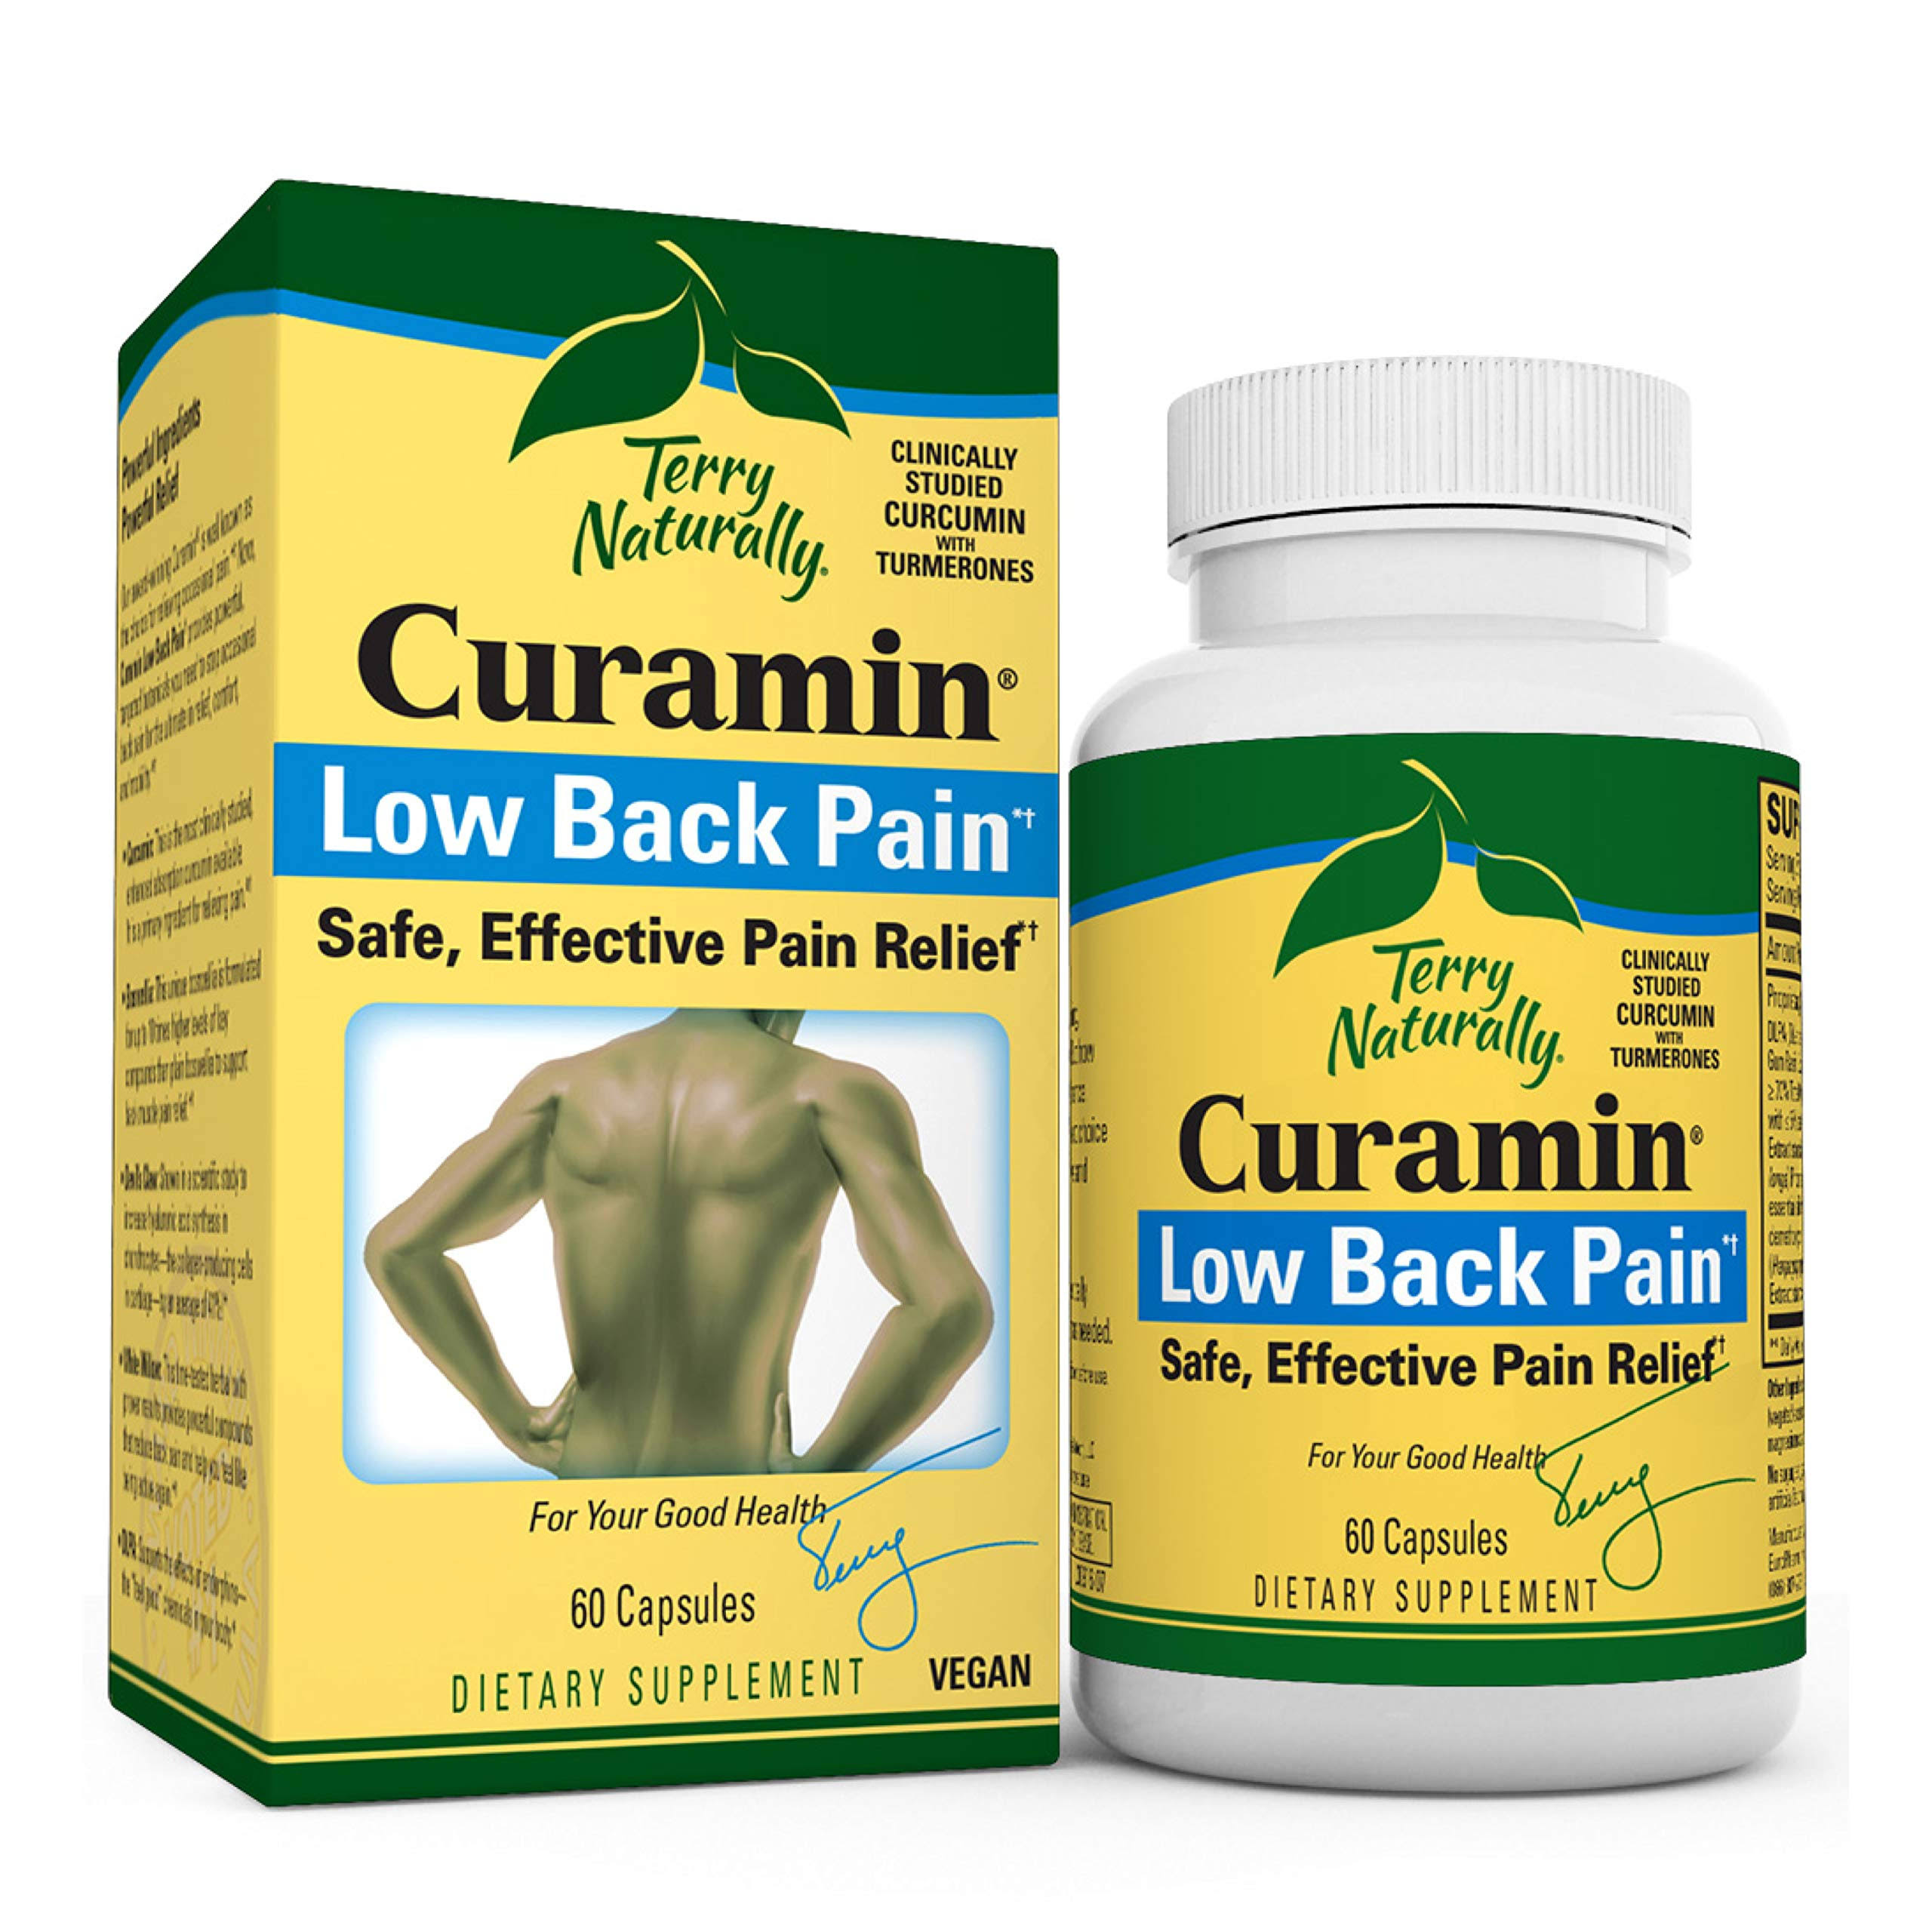 Terry Naturally Curamin Low Back Pain Dietary Supplement Capsules - 60ct